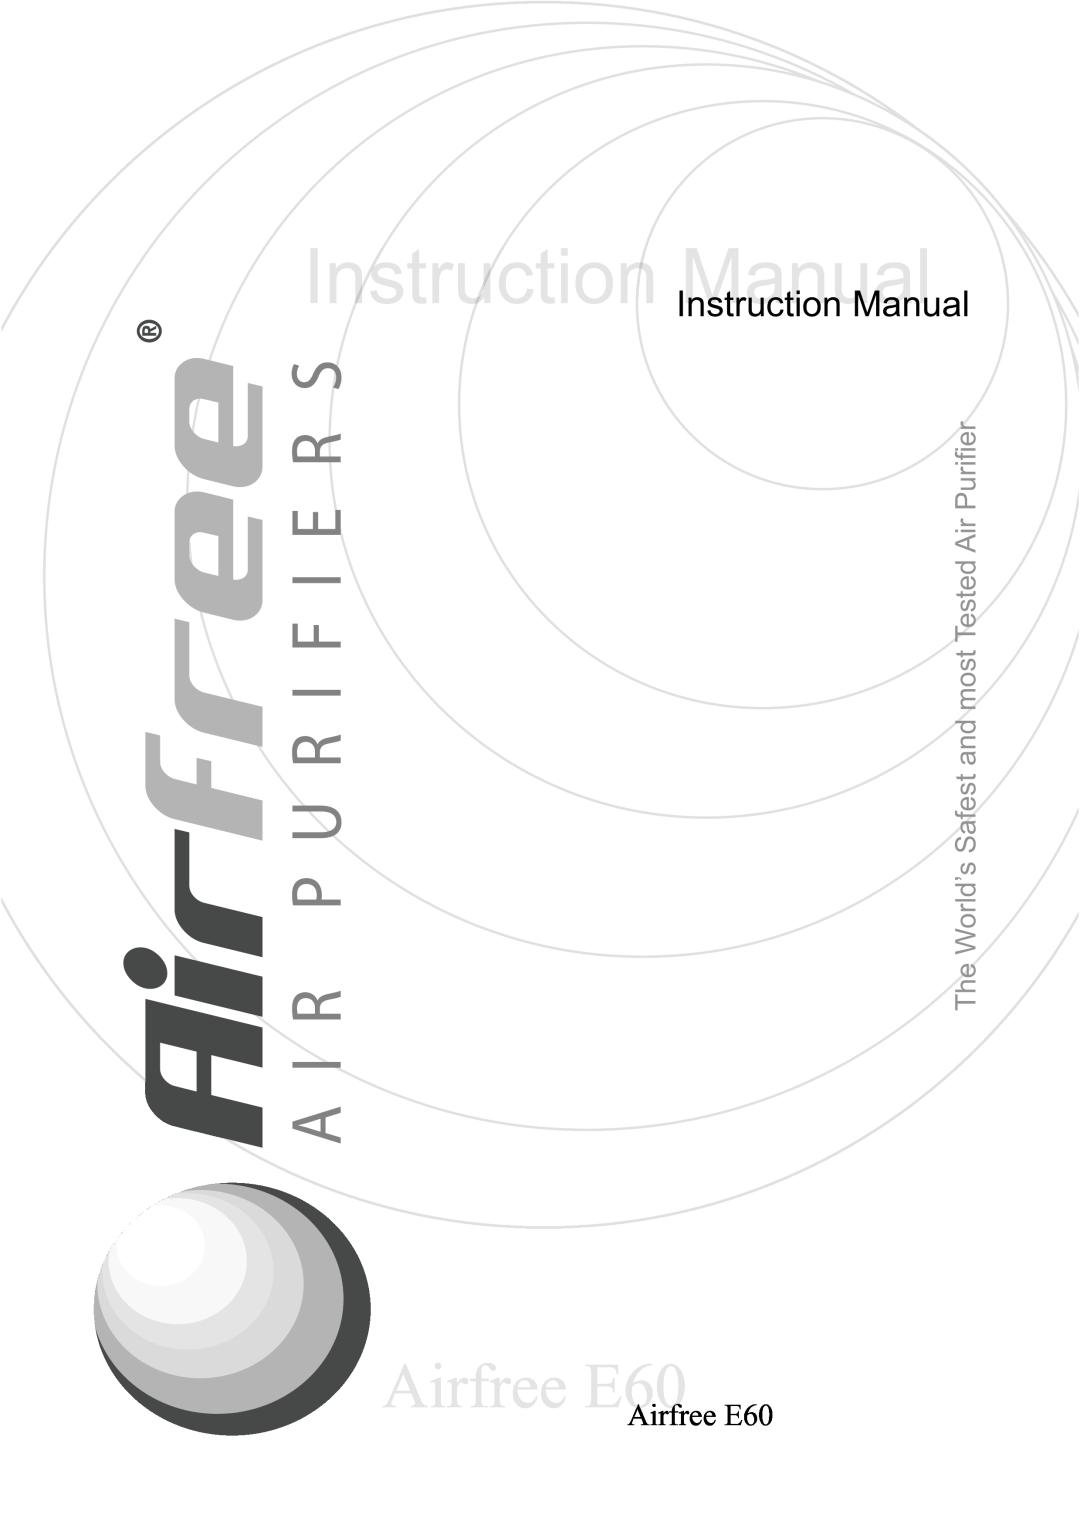 Airfree instruction manual Instruuctionn Manual, Airfree E60, The World’s Safest and most Tested Air Puriﬁer 